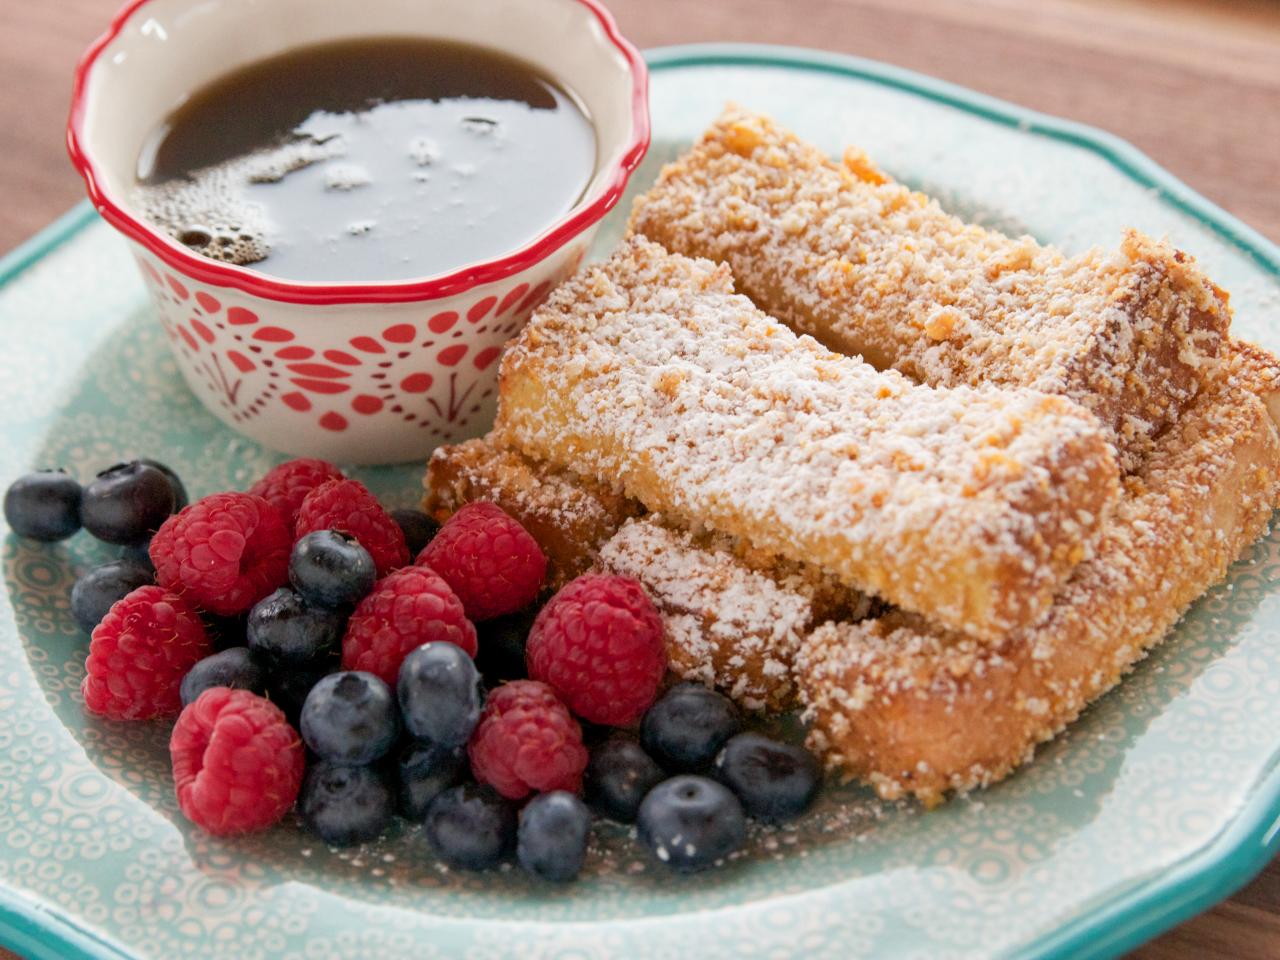 These yummy French Toast sticks from Ree Drummond are sure to do the trick!...